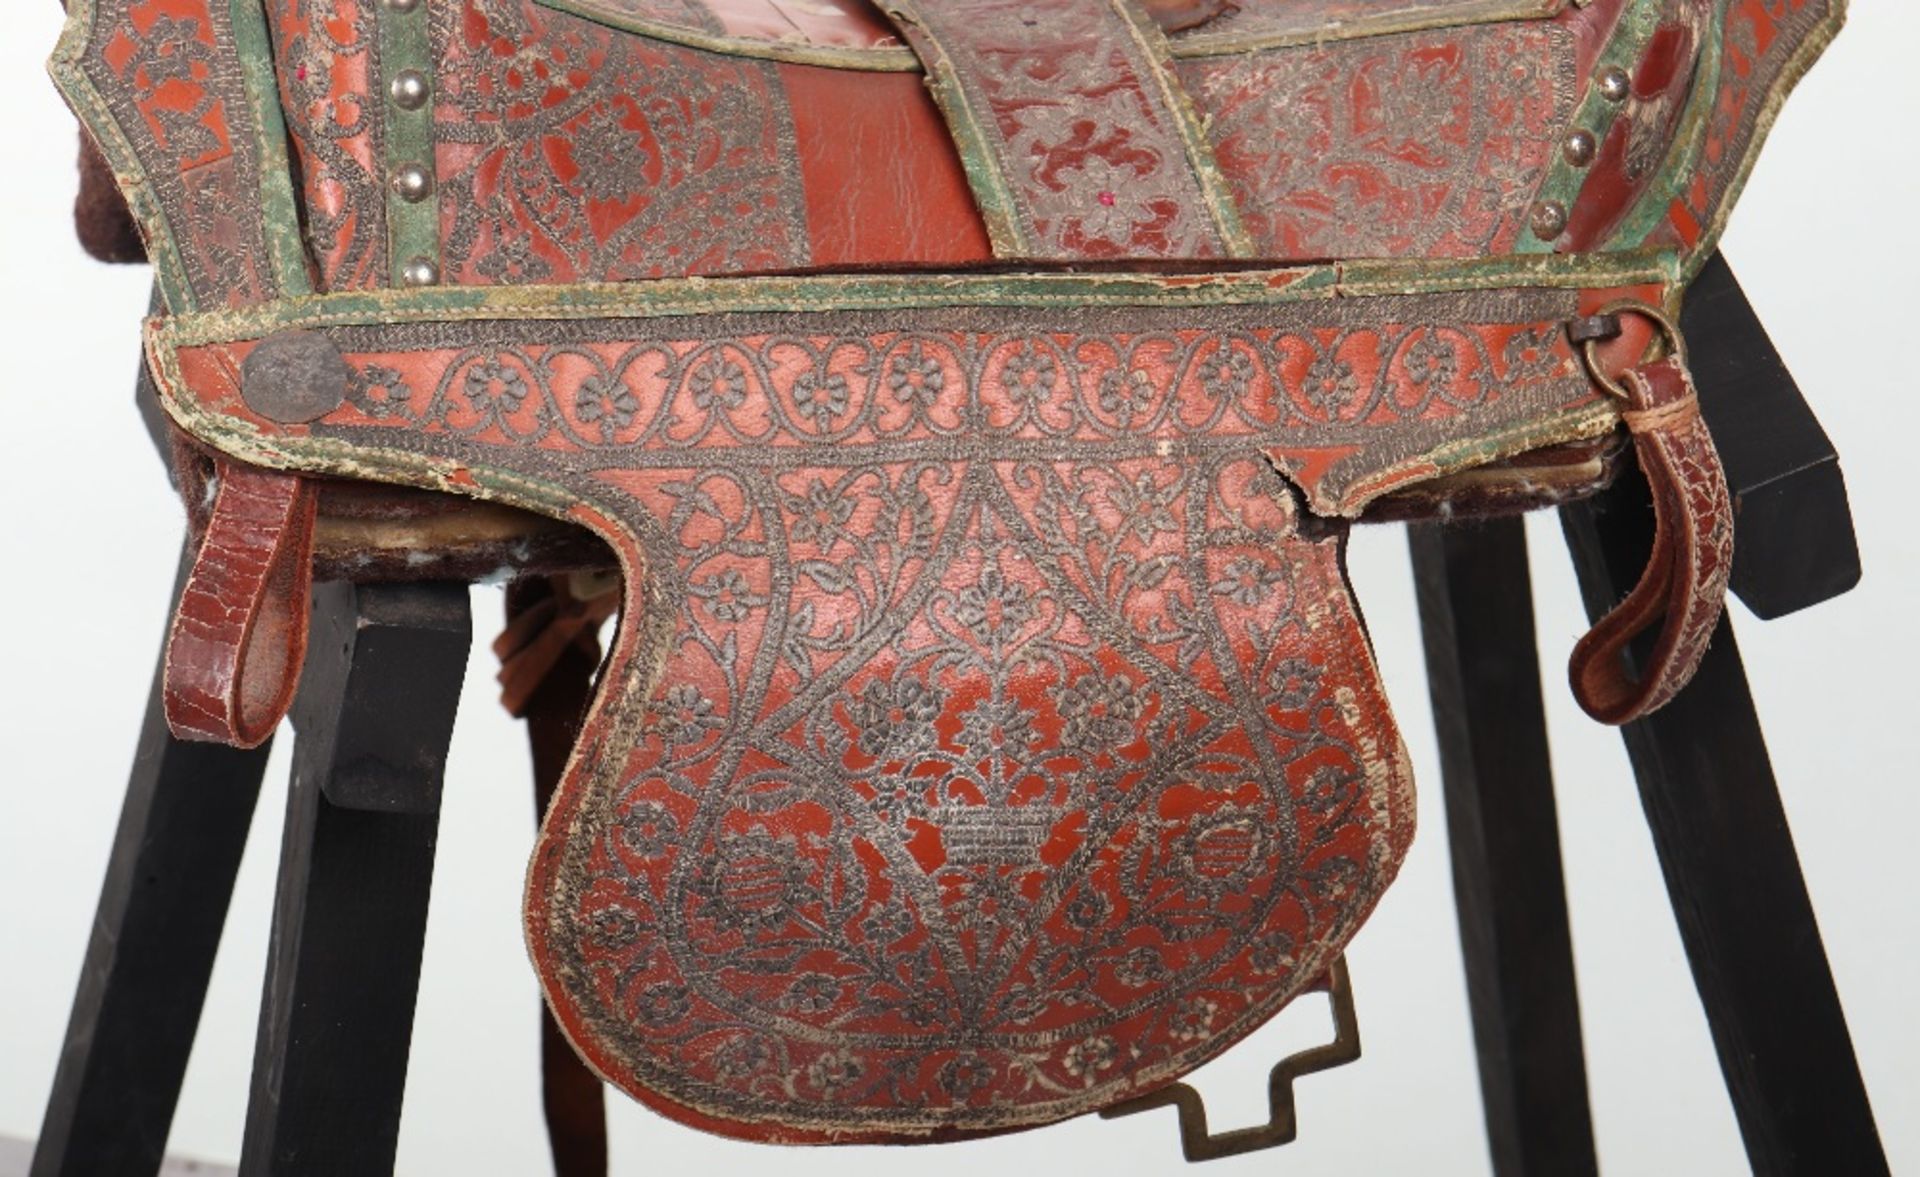 Fine and Scarce North Indian Saddle, Probably Late 19th or Early 20th Century - Image 6 of 12